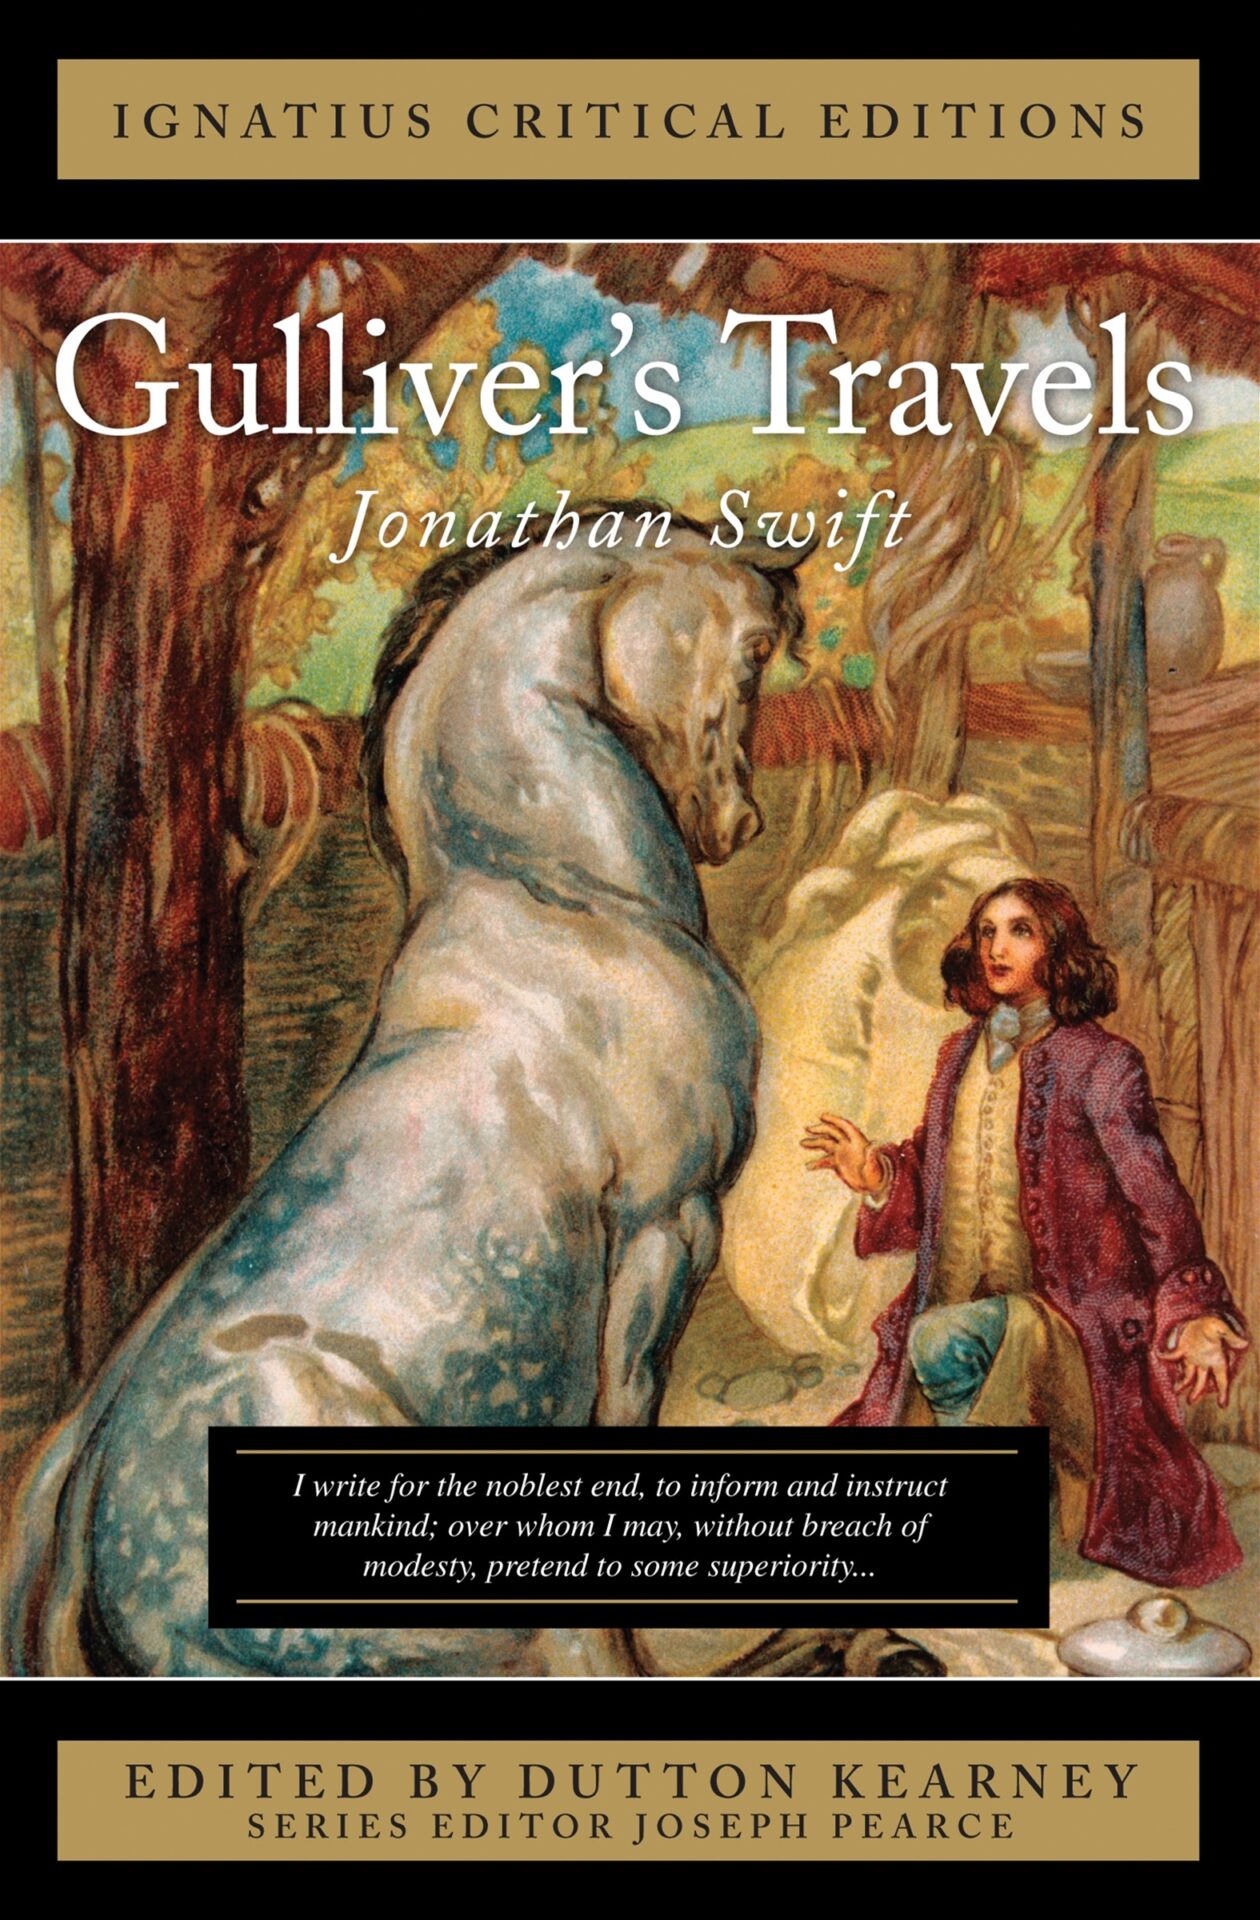 gulliver's travel book review